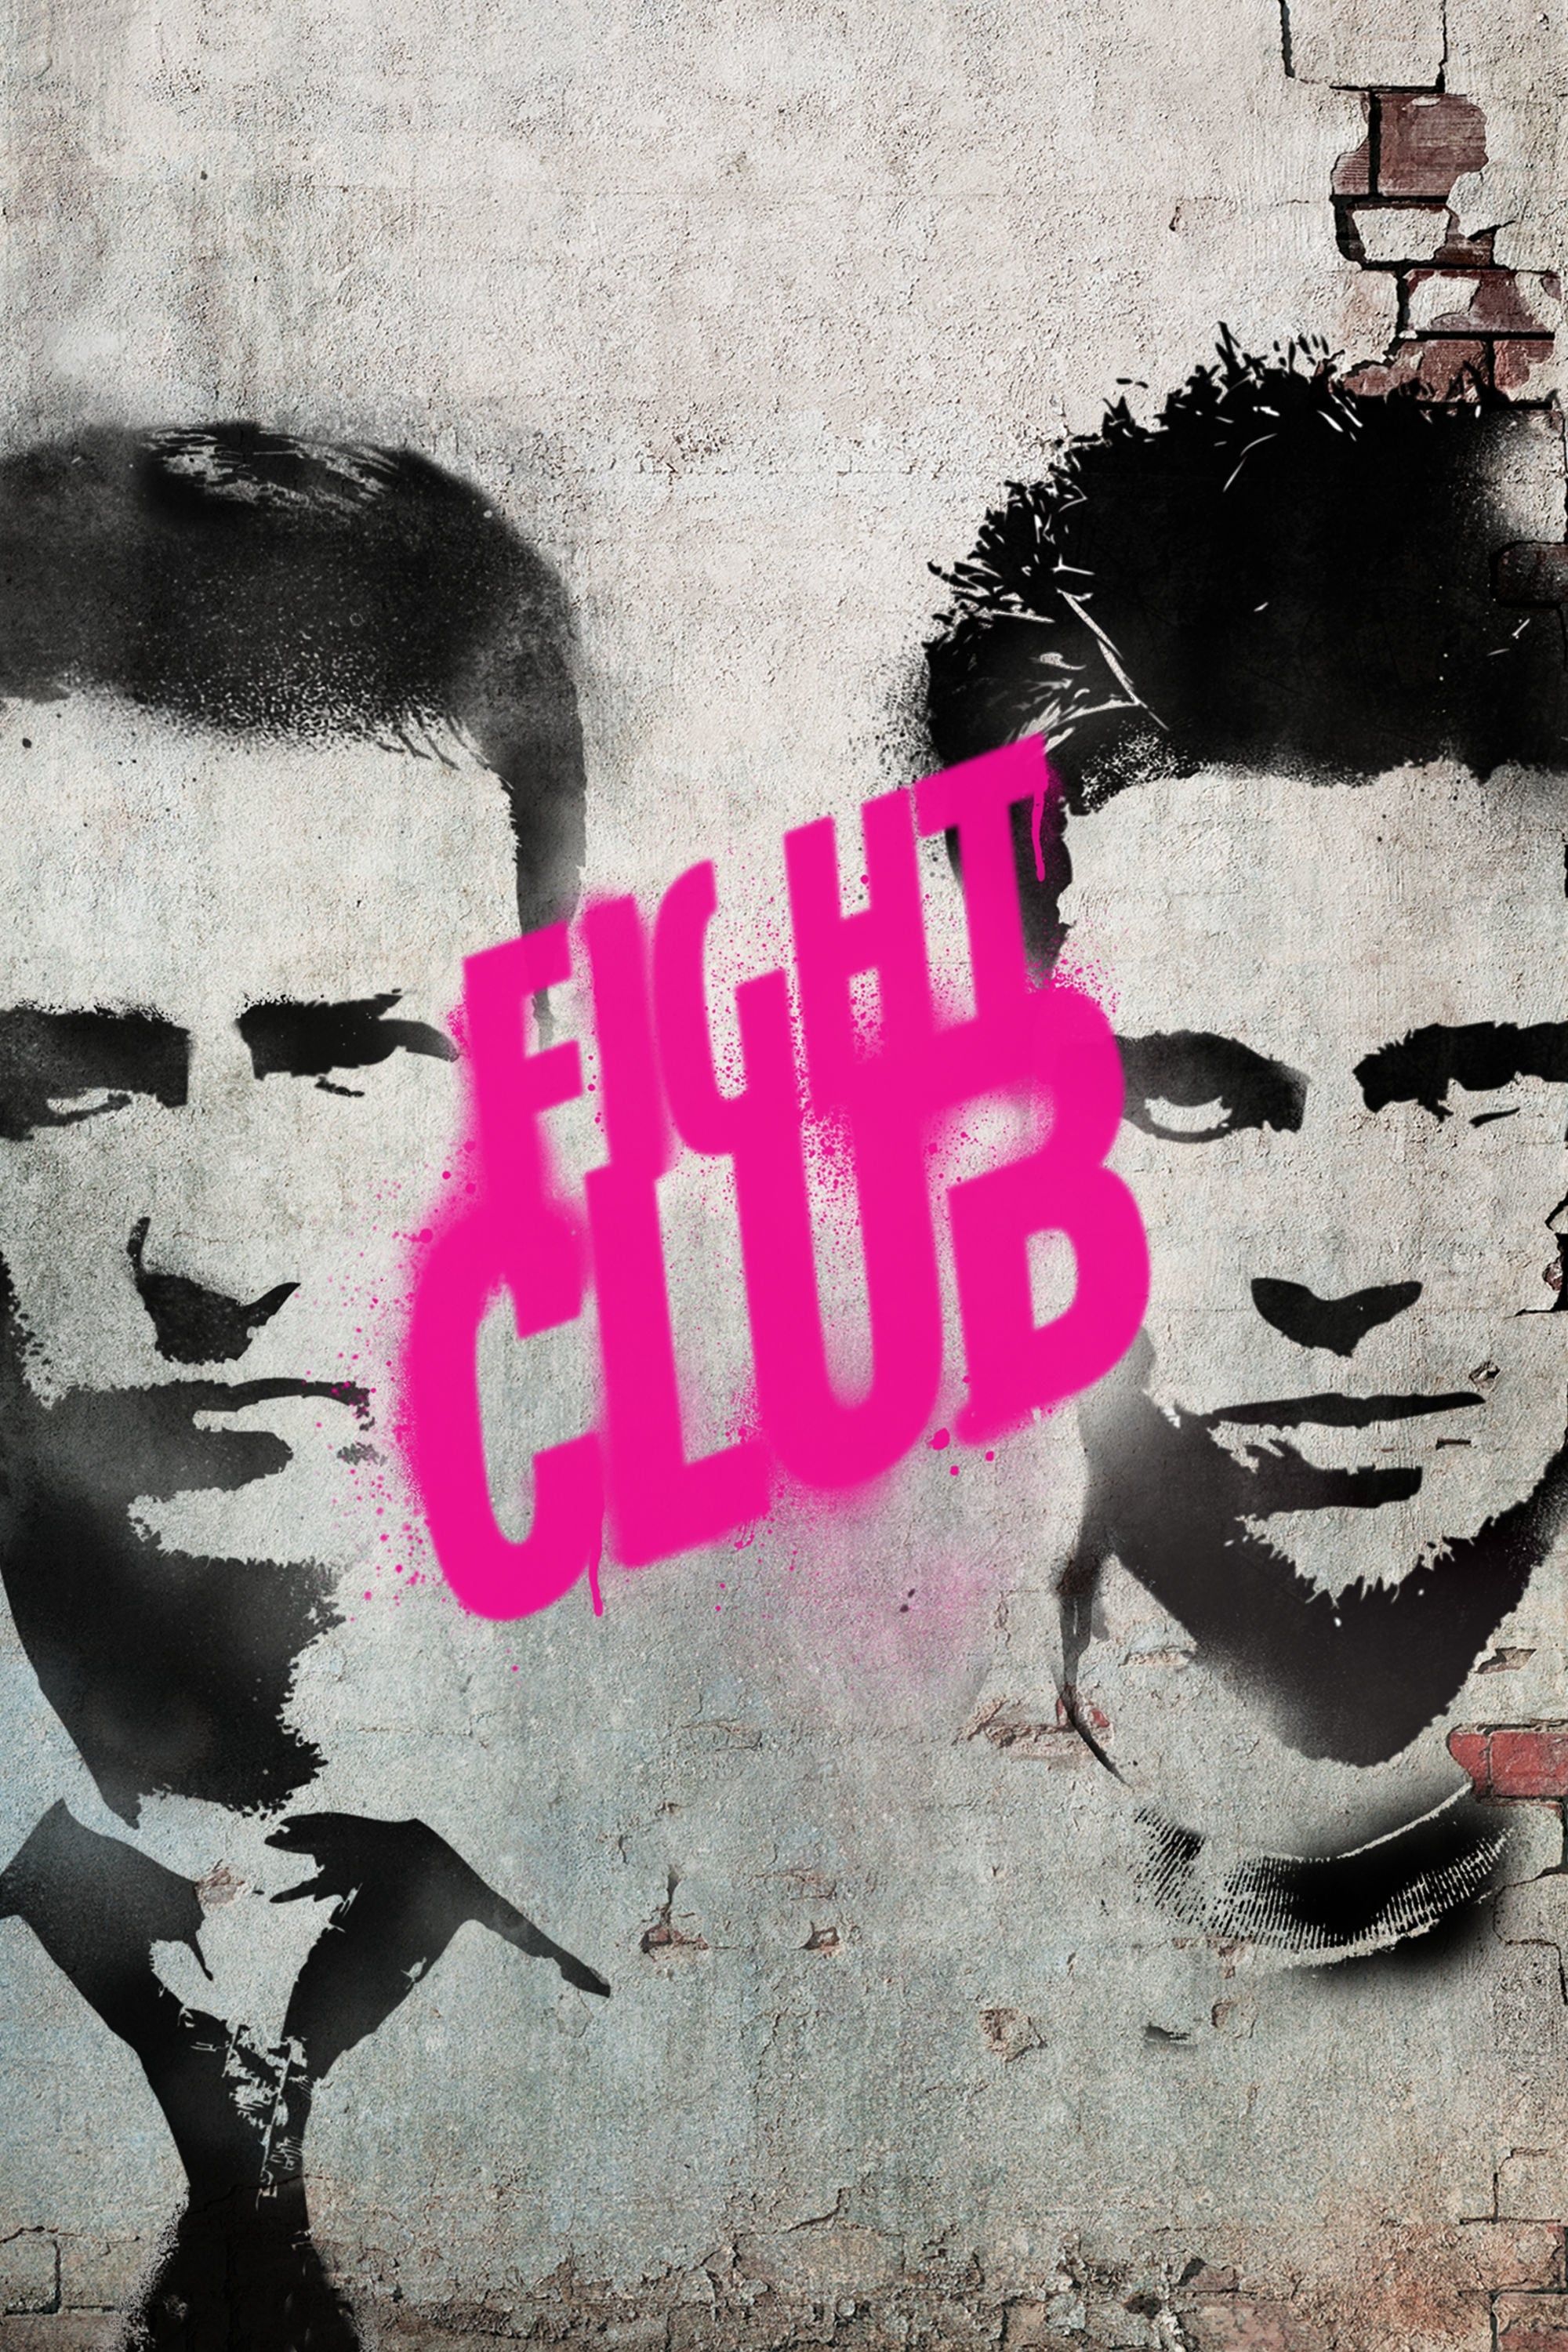 David Fincher Reveals Why He Hasn't Watched the Fight Club For 20 Years